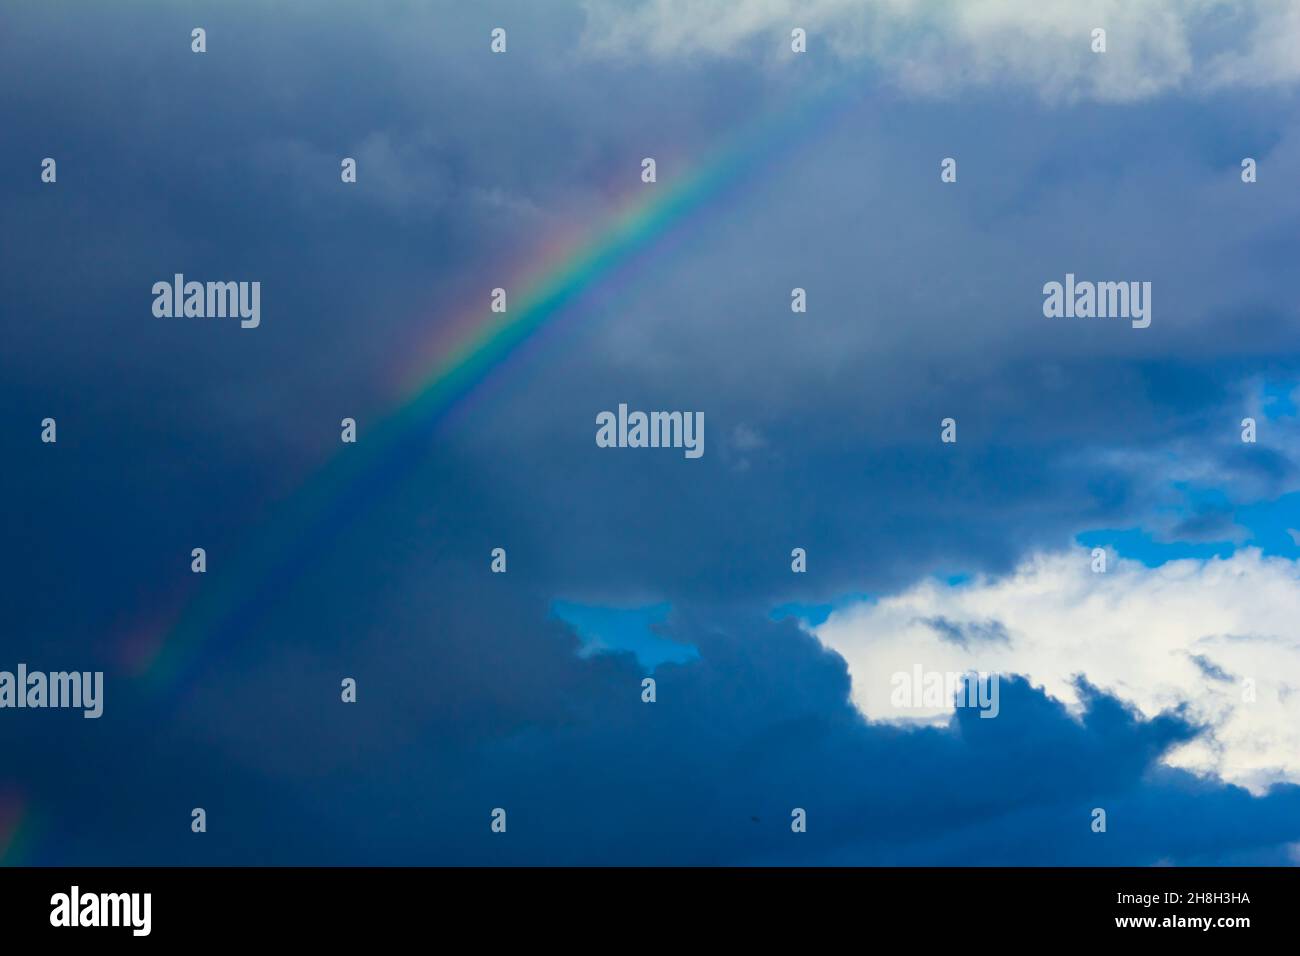 Colorful rainbow with dark storm clouds against a background of blue summer sky. Concept of change, hope. Stock Photo